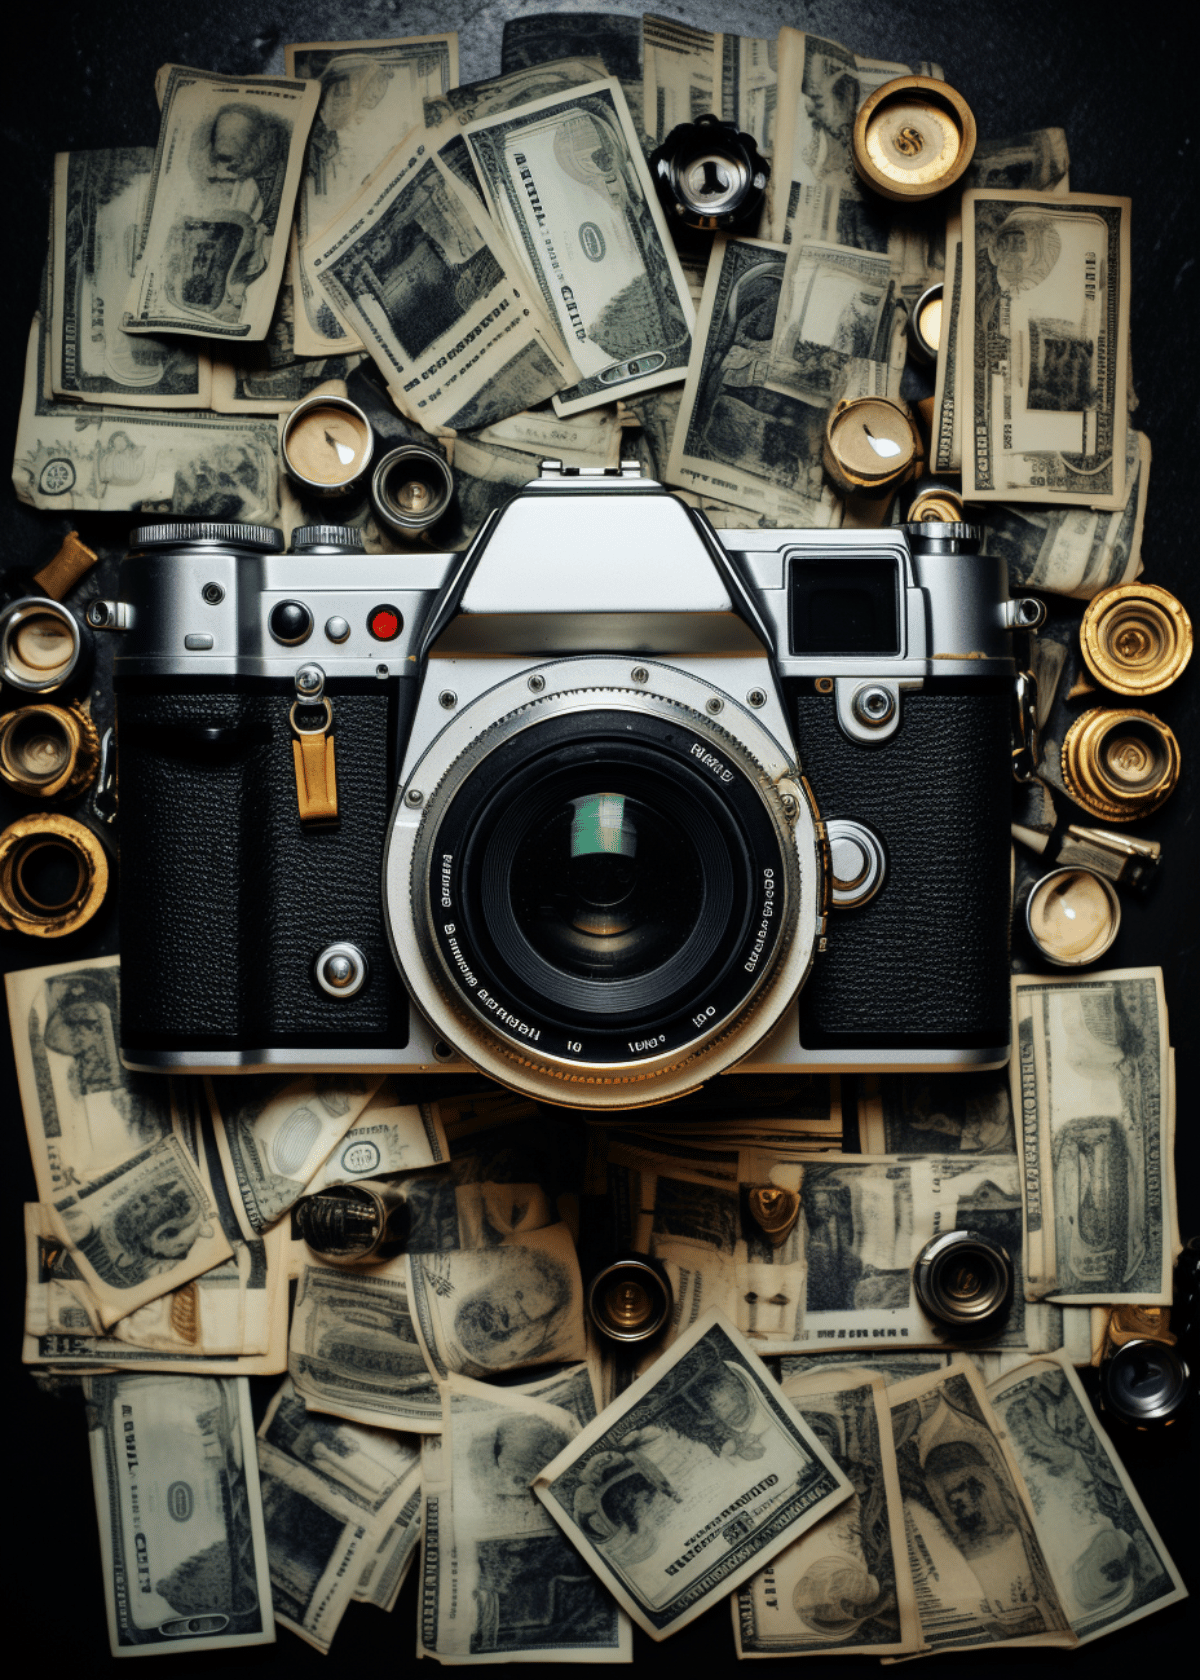 ATTENTION PHOTOGRAPHERS! The Best Camera Under $1000 Is Waiting To Capture Its Moment With You! 📷